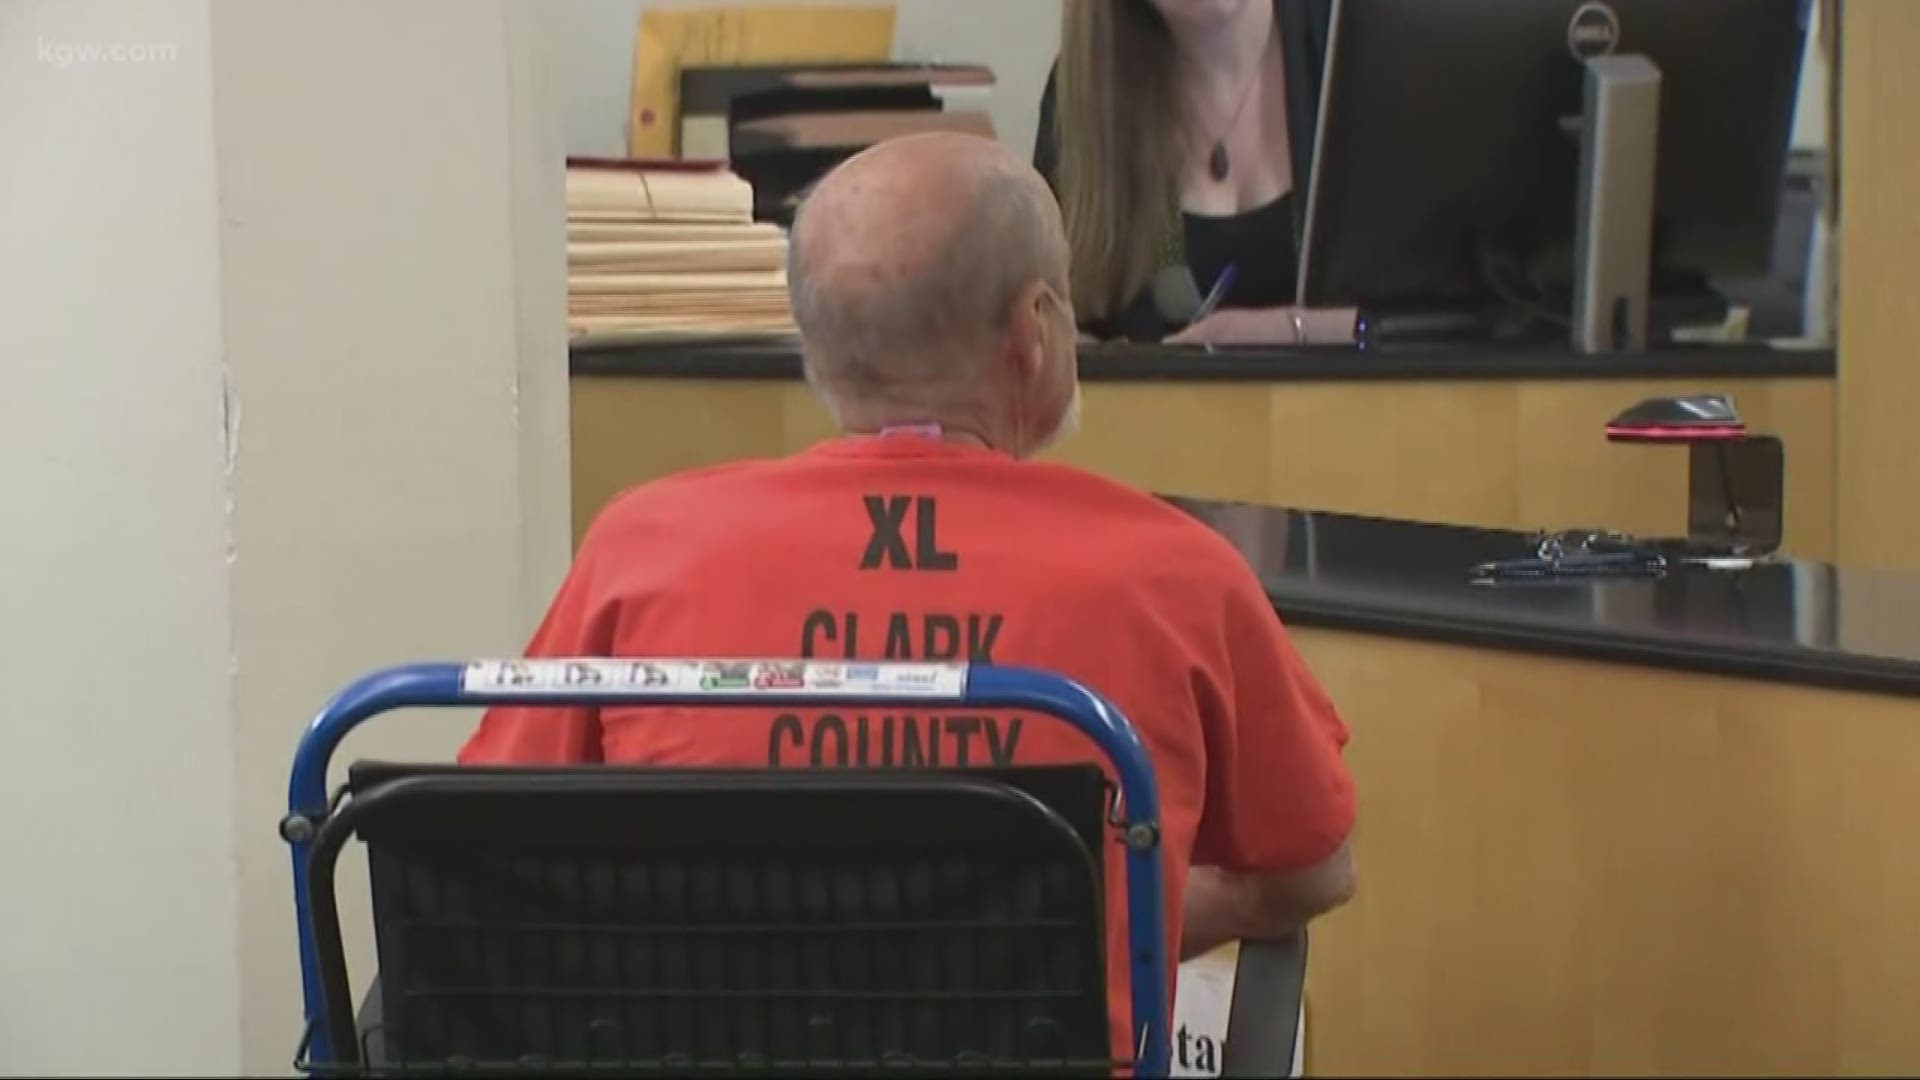 David E. Croswell, 71, of Washougal, has been charged with two counts of vehicular homicide and felony hit-and-run. His blood alcohol lever was .085 four hours after the incident.